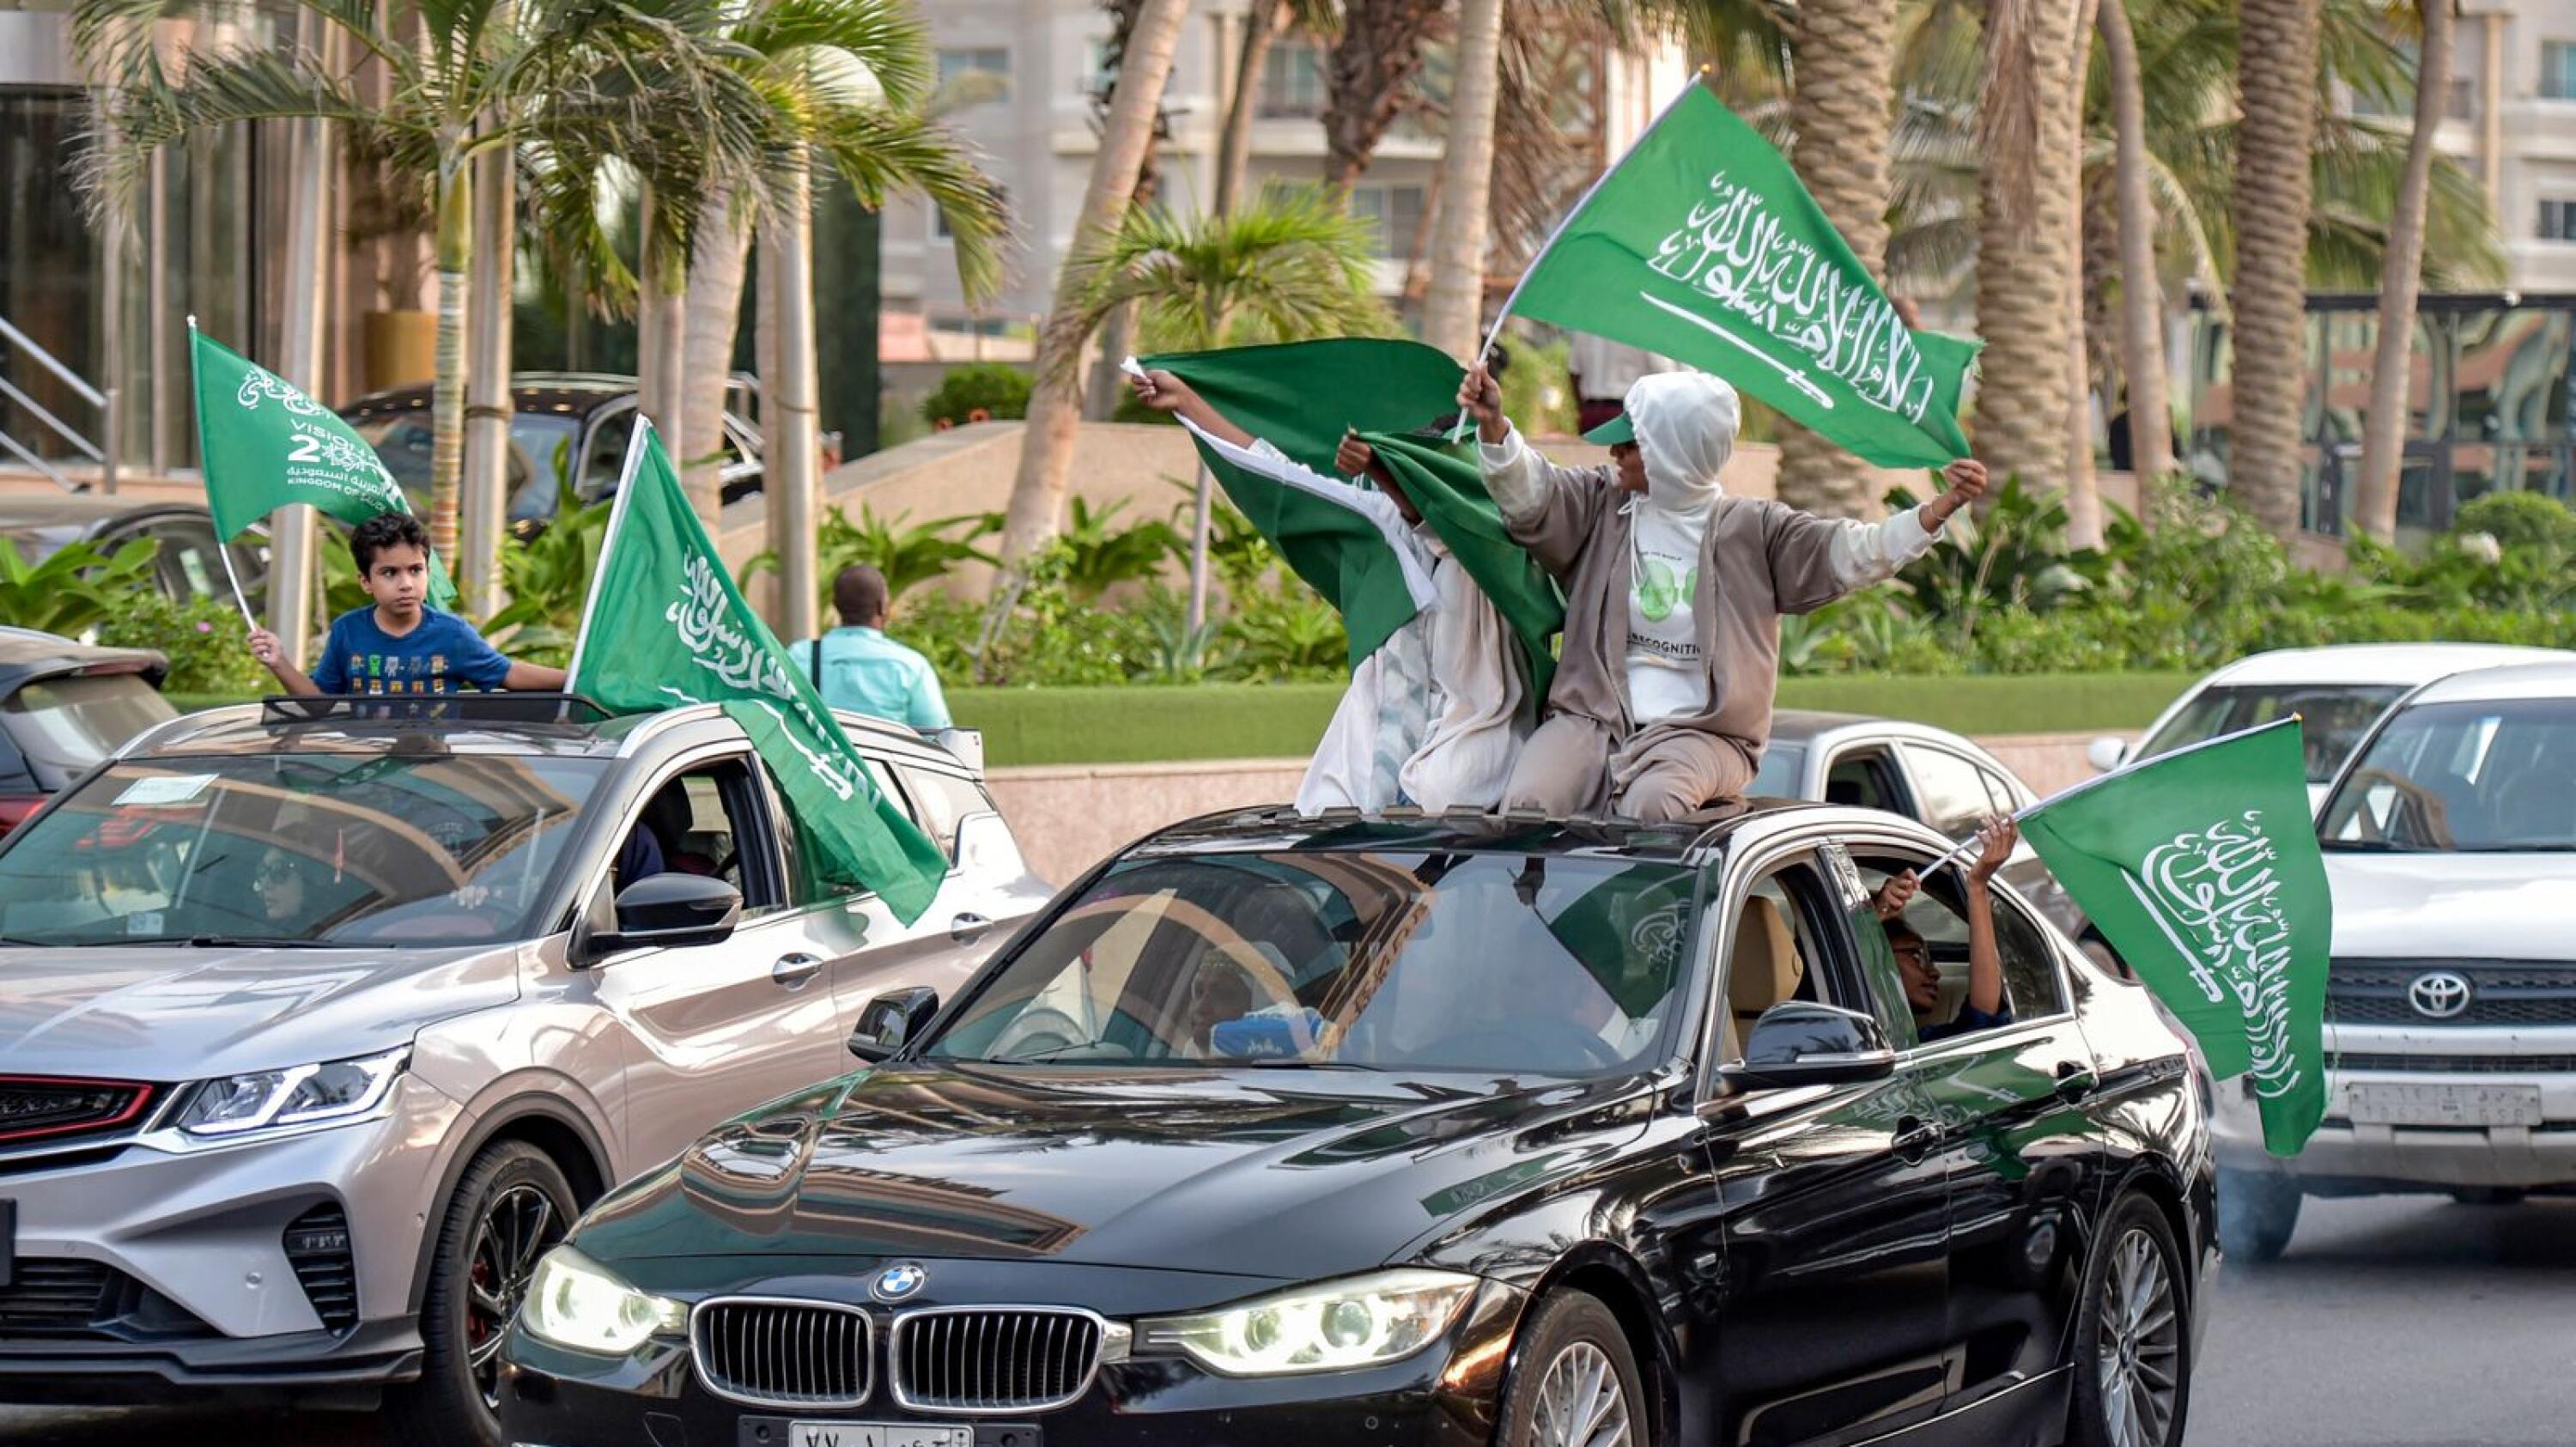 Saudi football fans wave their country's flags from vehicles as they celebrate their win over Argentina at the Qatar 2022 World Cup, in the capital Riyadh on Tuesday